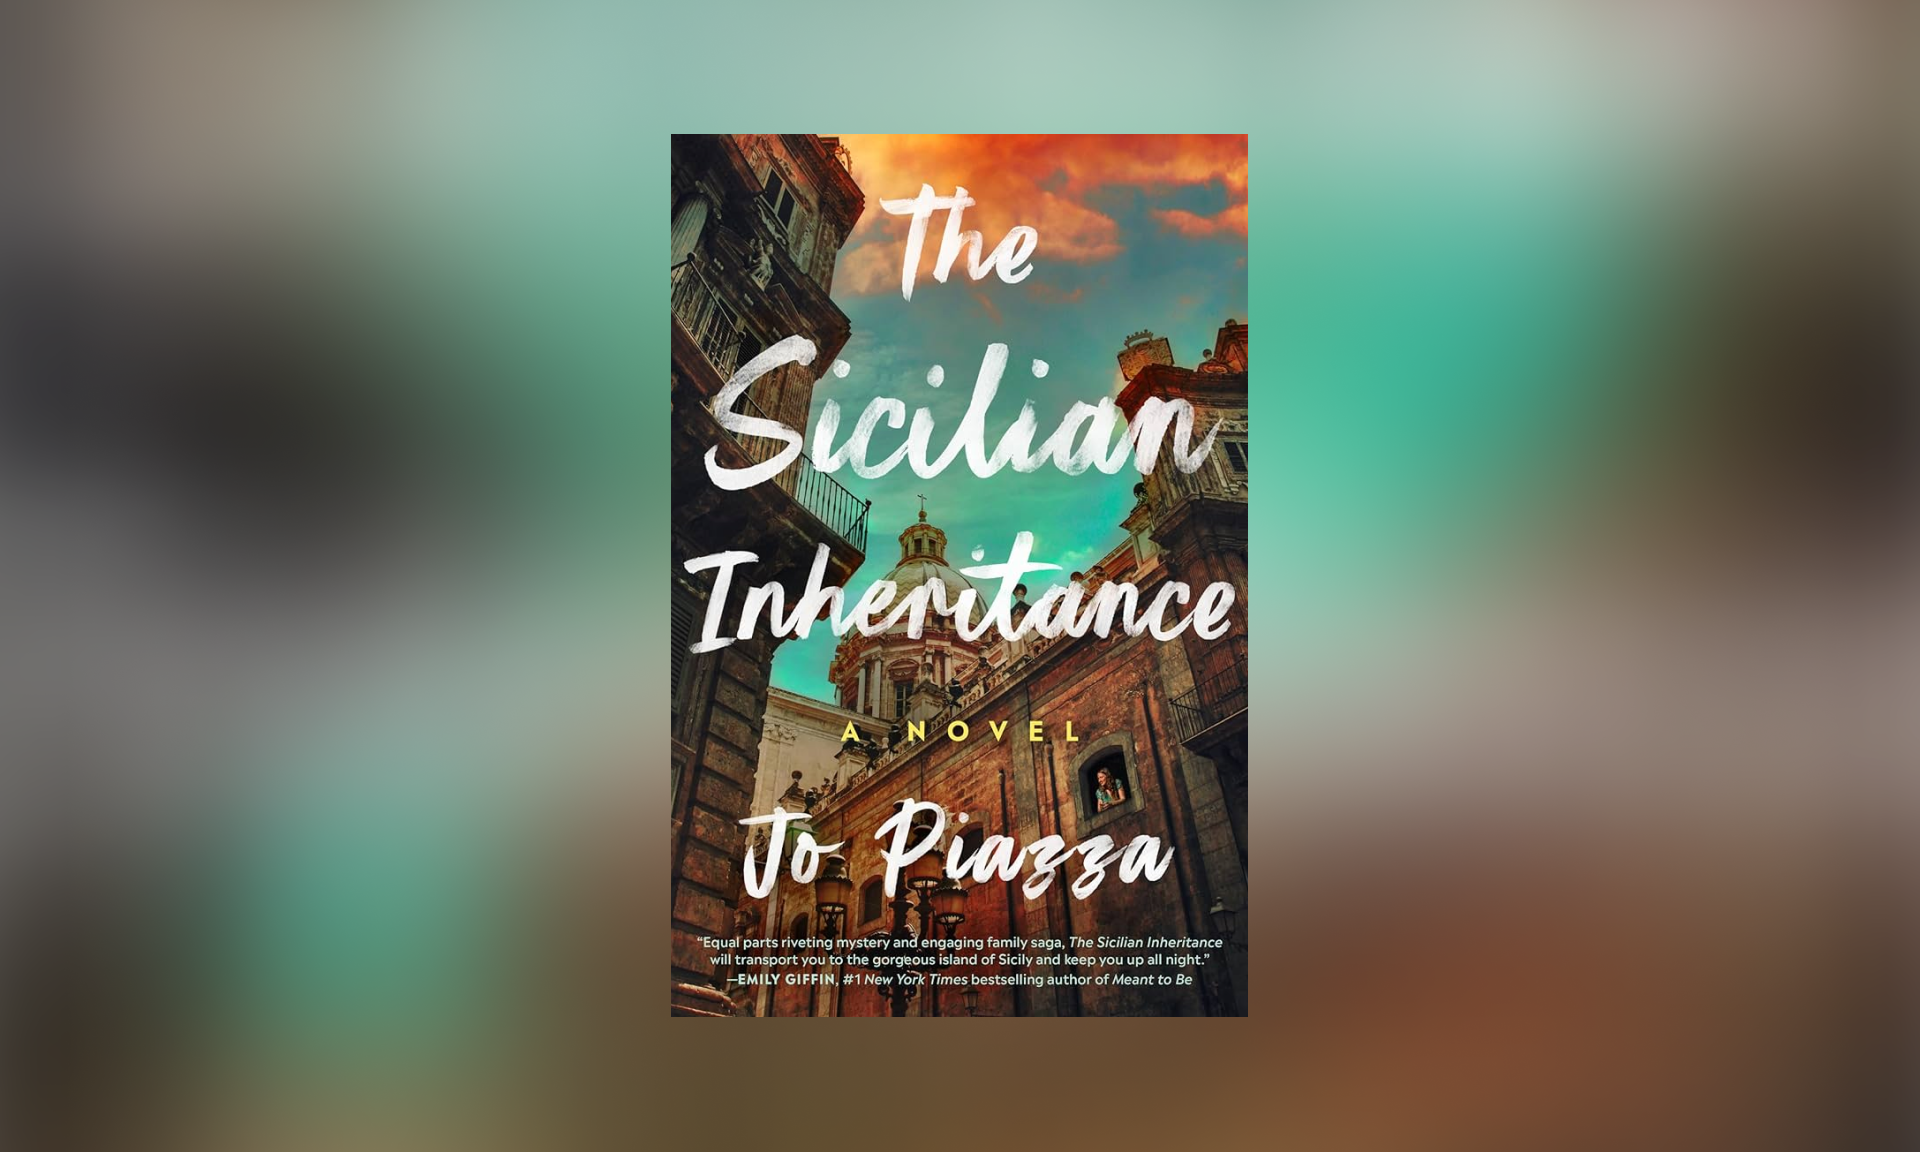 Book cover for "The Sicilian Inheritance" by Jo Piazza